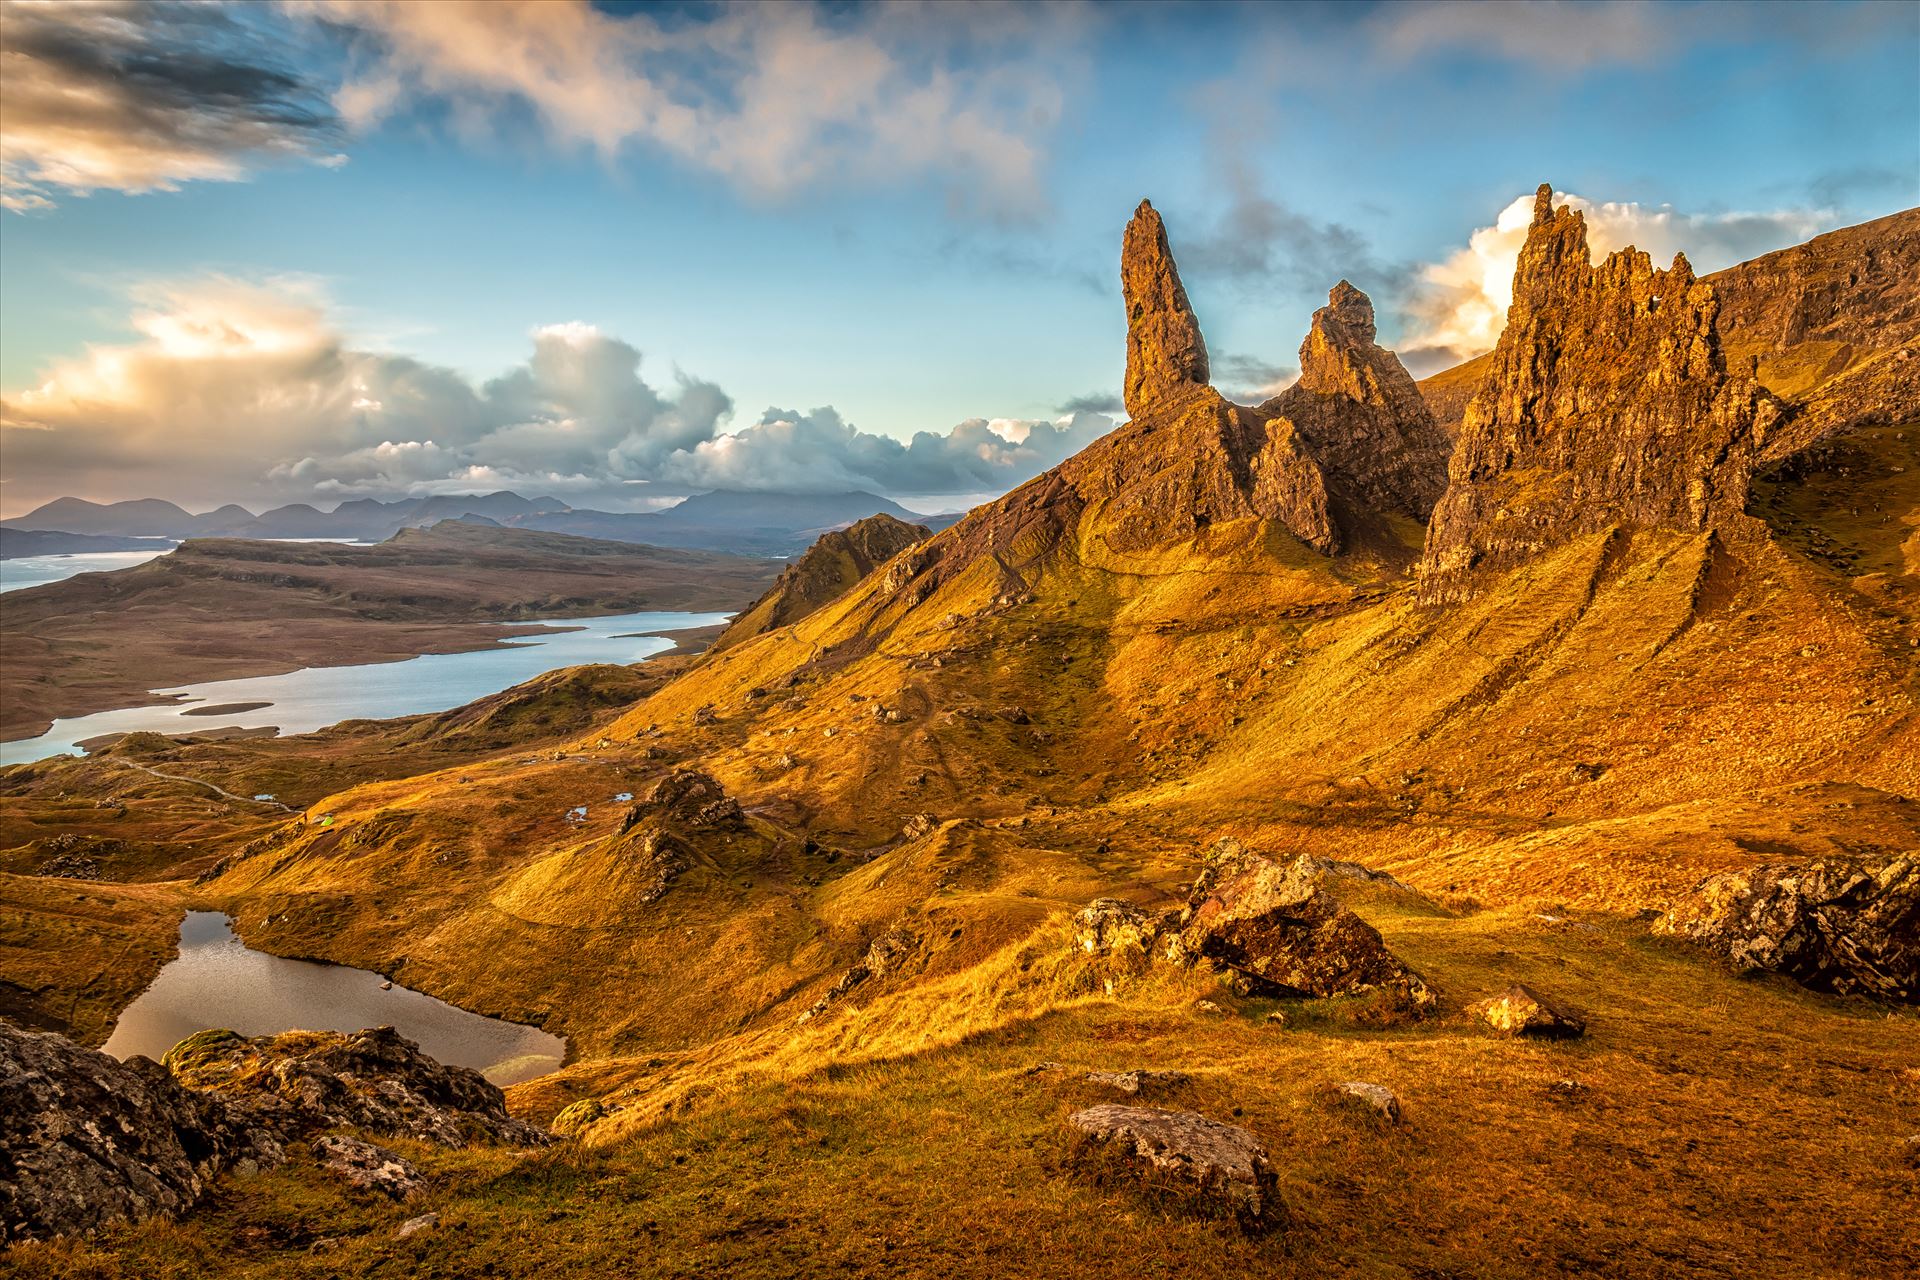 The Old Man of StorrThe Storr is a rocky hill on the Trotternish peninsula of the Isle of Skye in Scotland. The hill presents a steep rocky eastern face overlooking the Sound of Raasay, contrasting with gentler grassy slopes to the west.